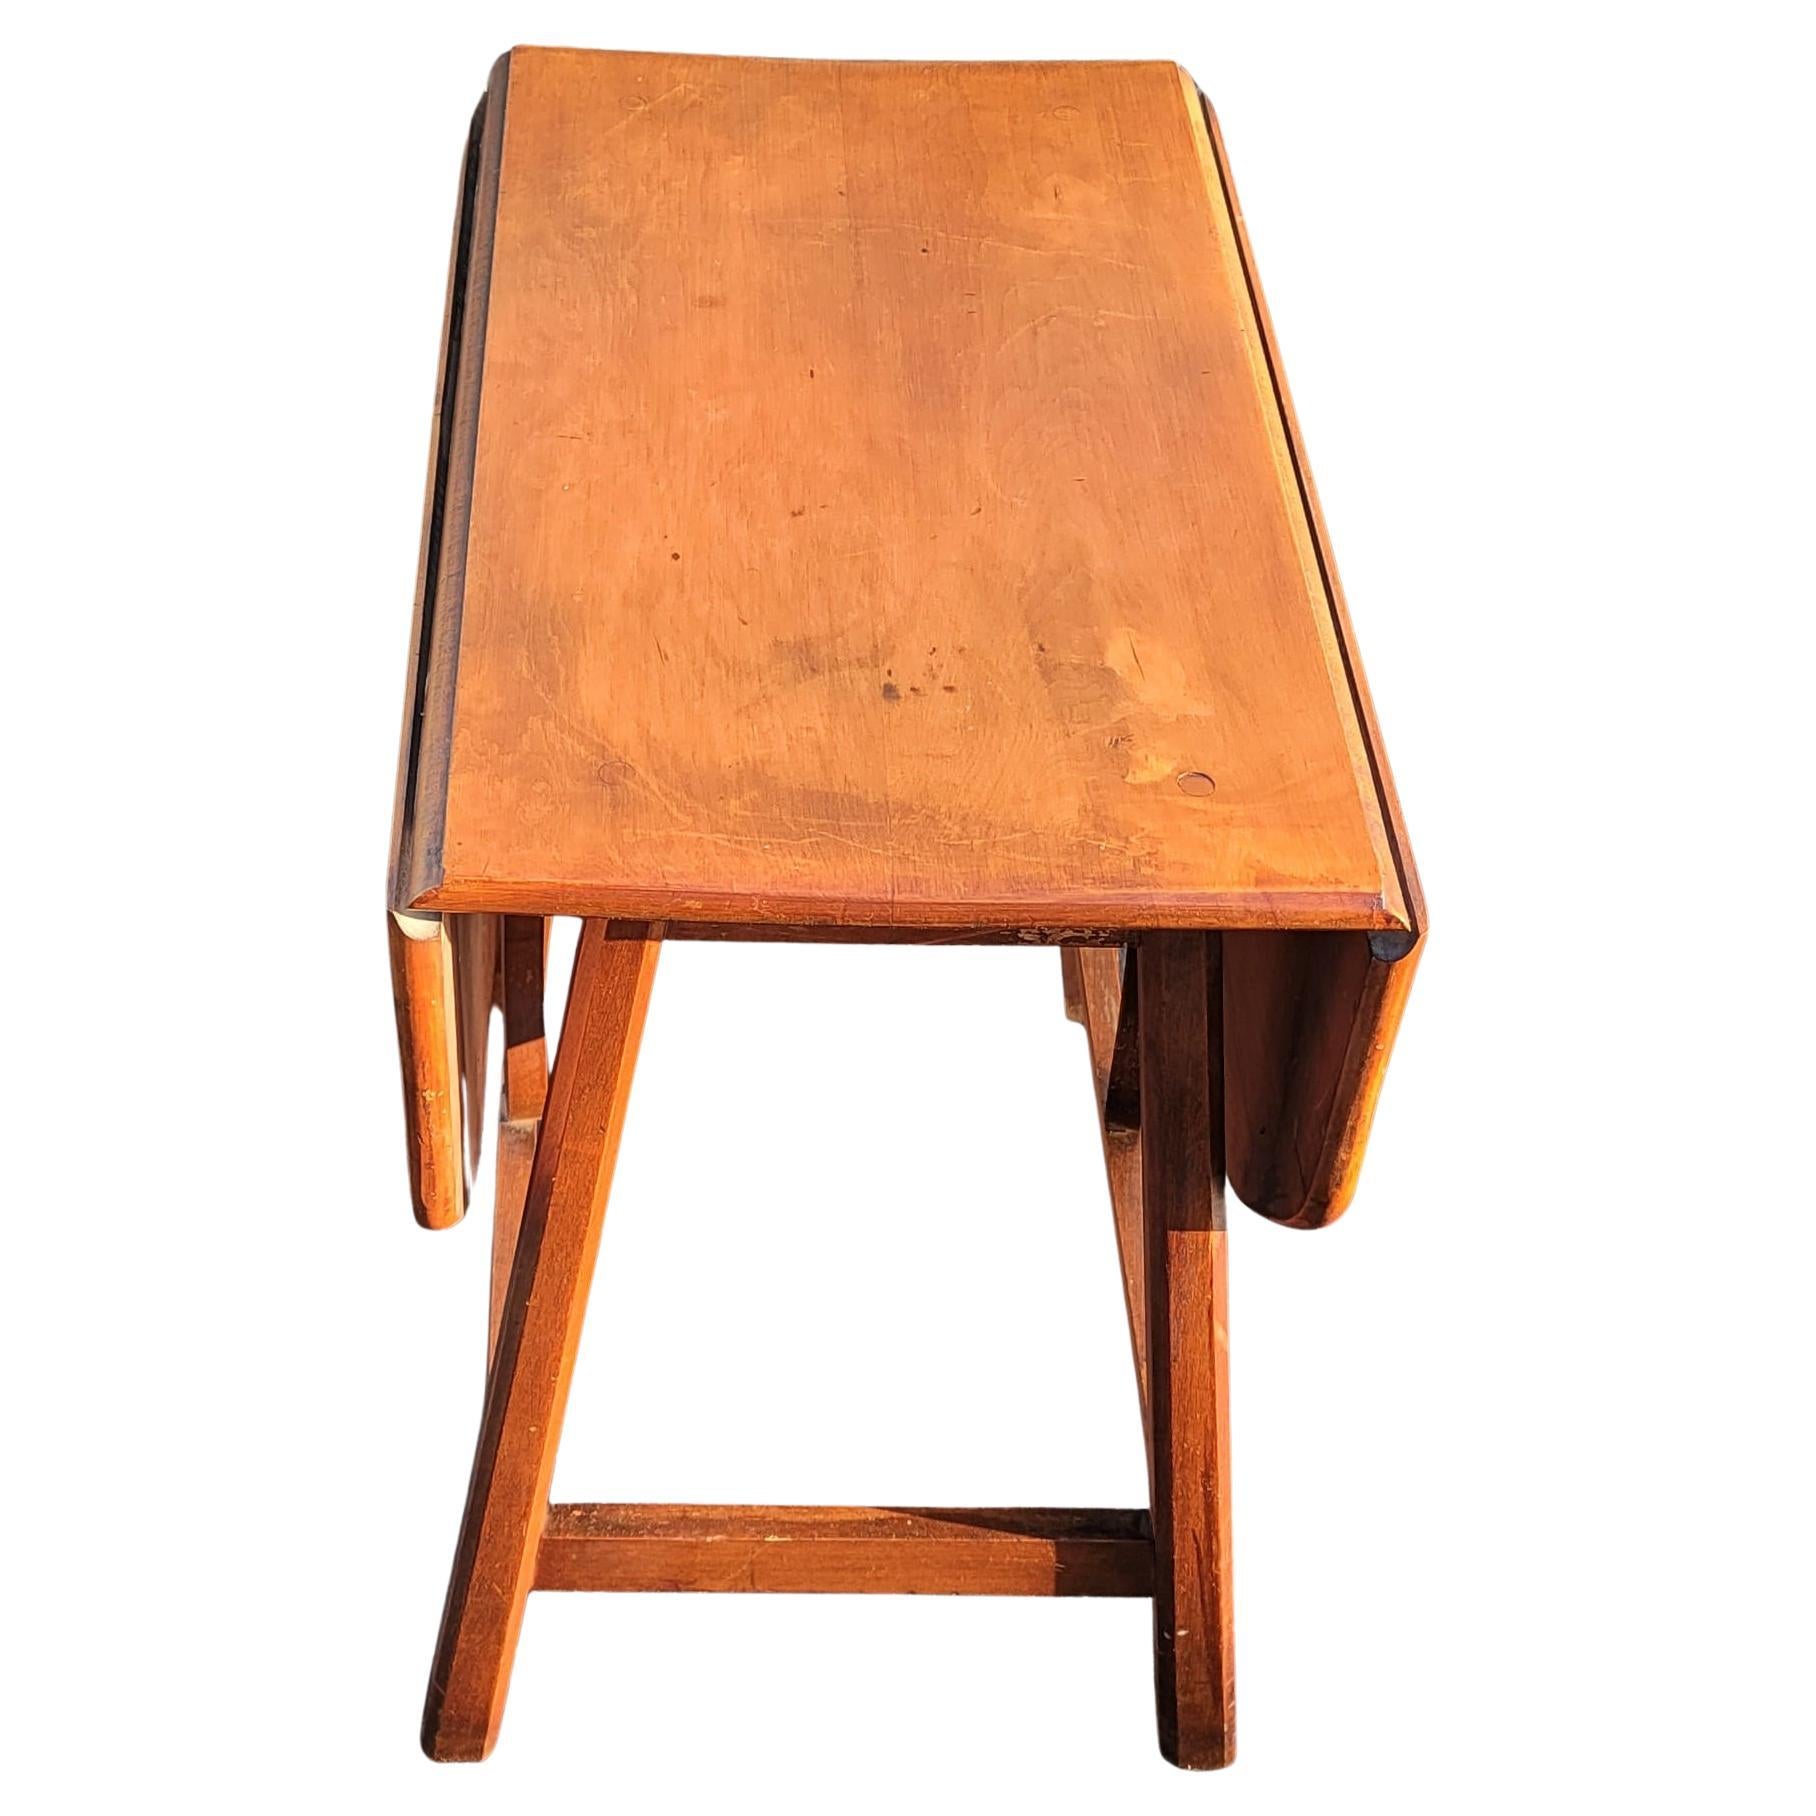 American Colonial 1940s Early American Style Cherry Drop-Leaf Side Table For Sale